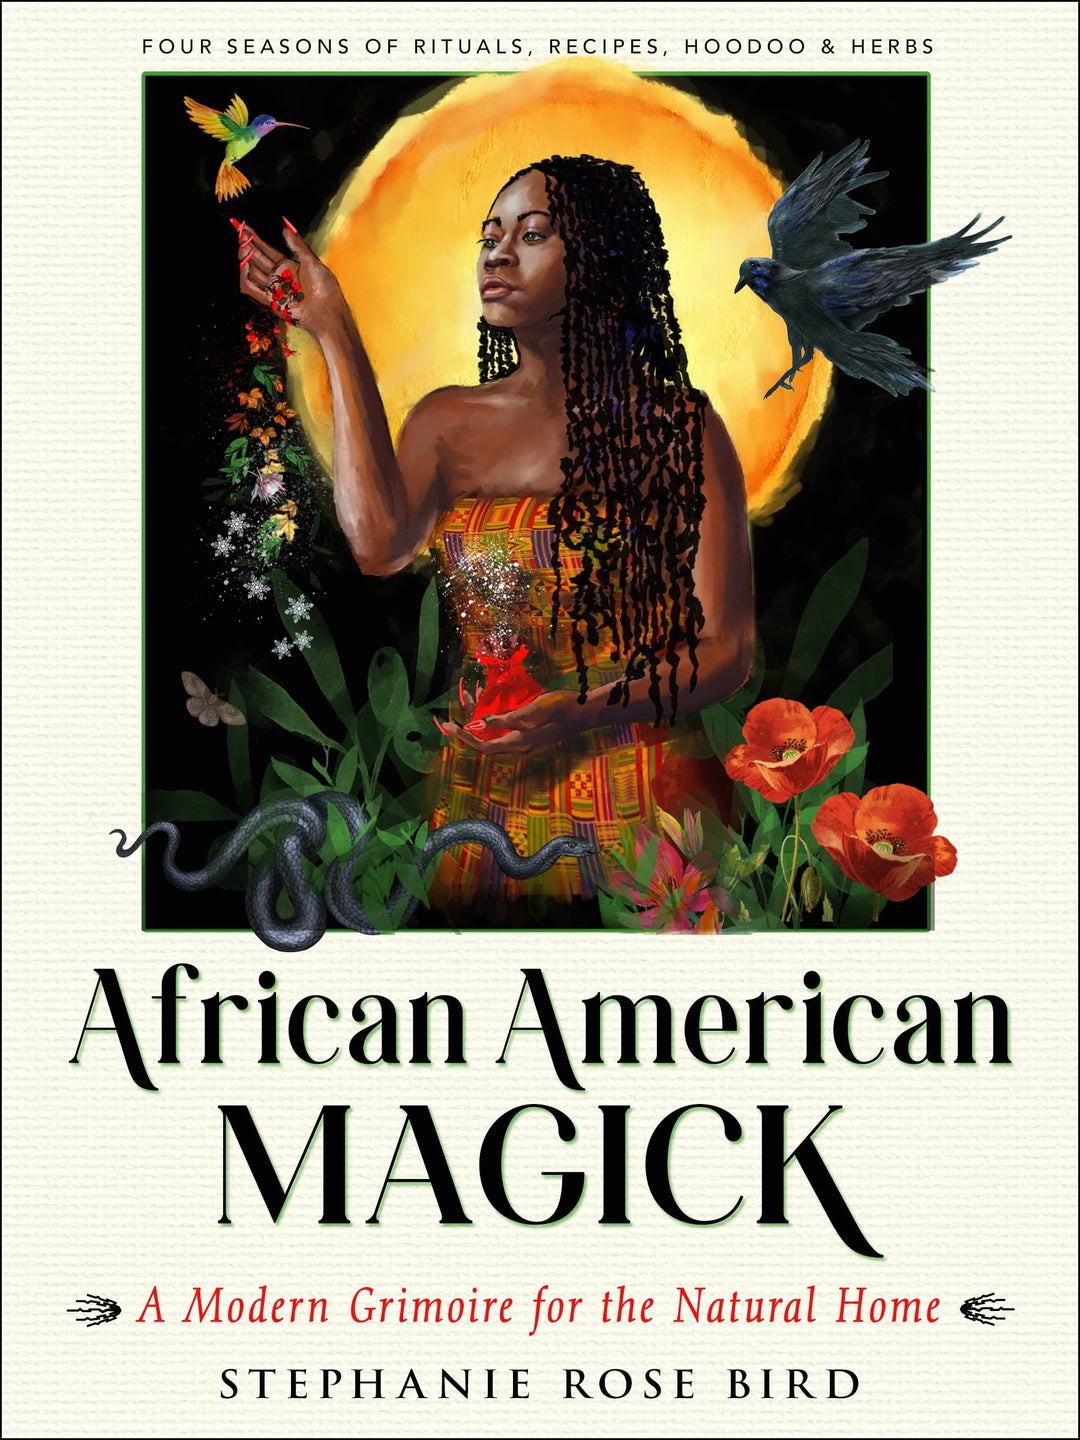 African American Magick: A Modern Grimoire for the Natural Home (Four Seasons of Rituals, Recipes, Hoodoo & Herbs) by Stephanie Rose Bird